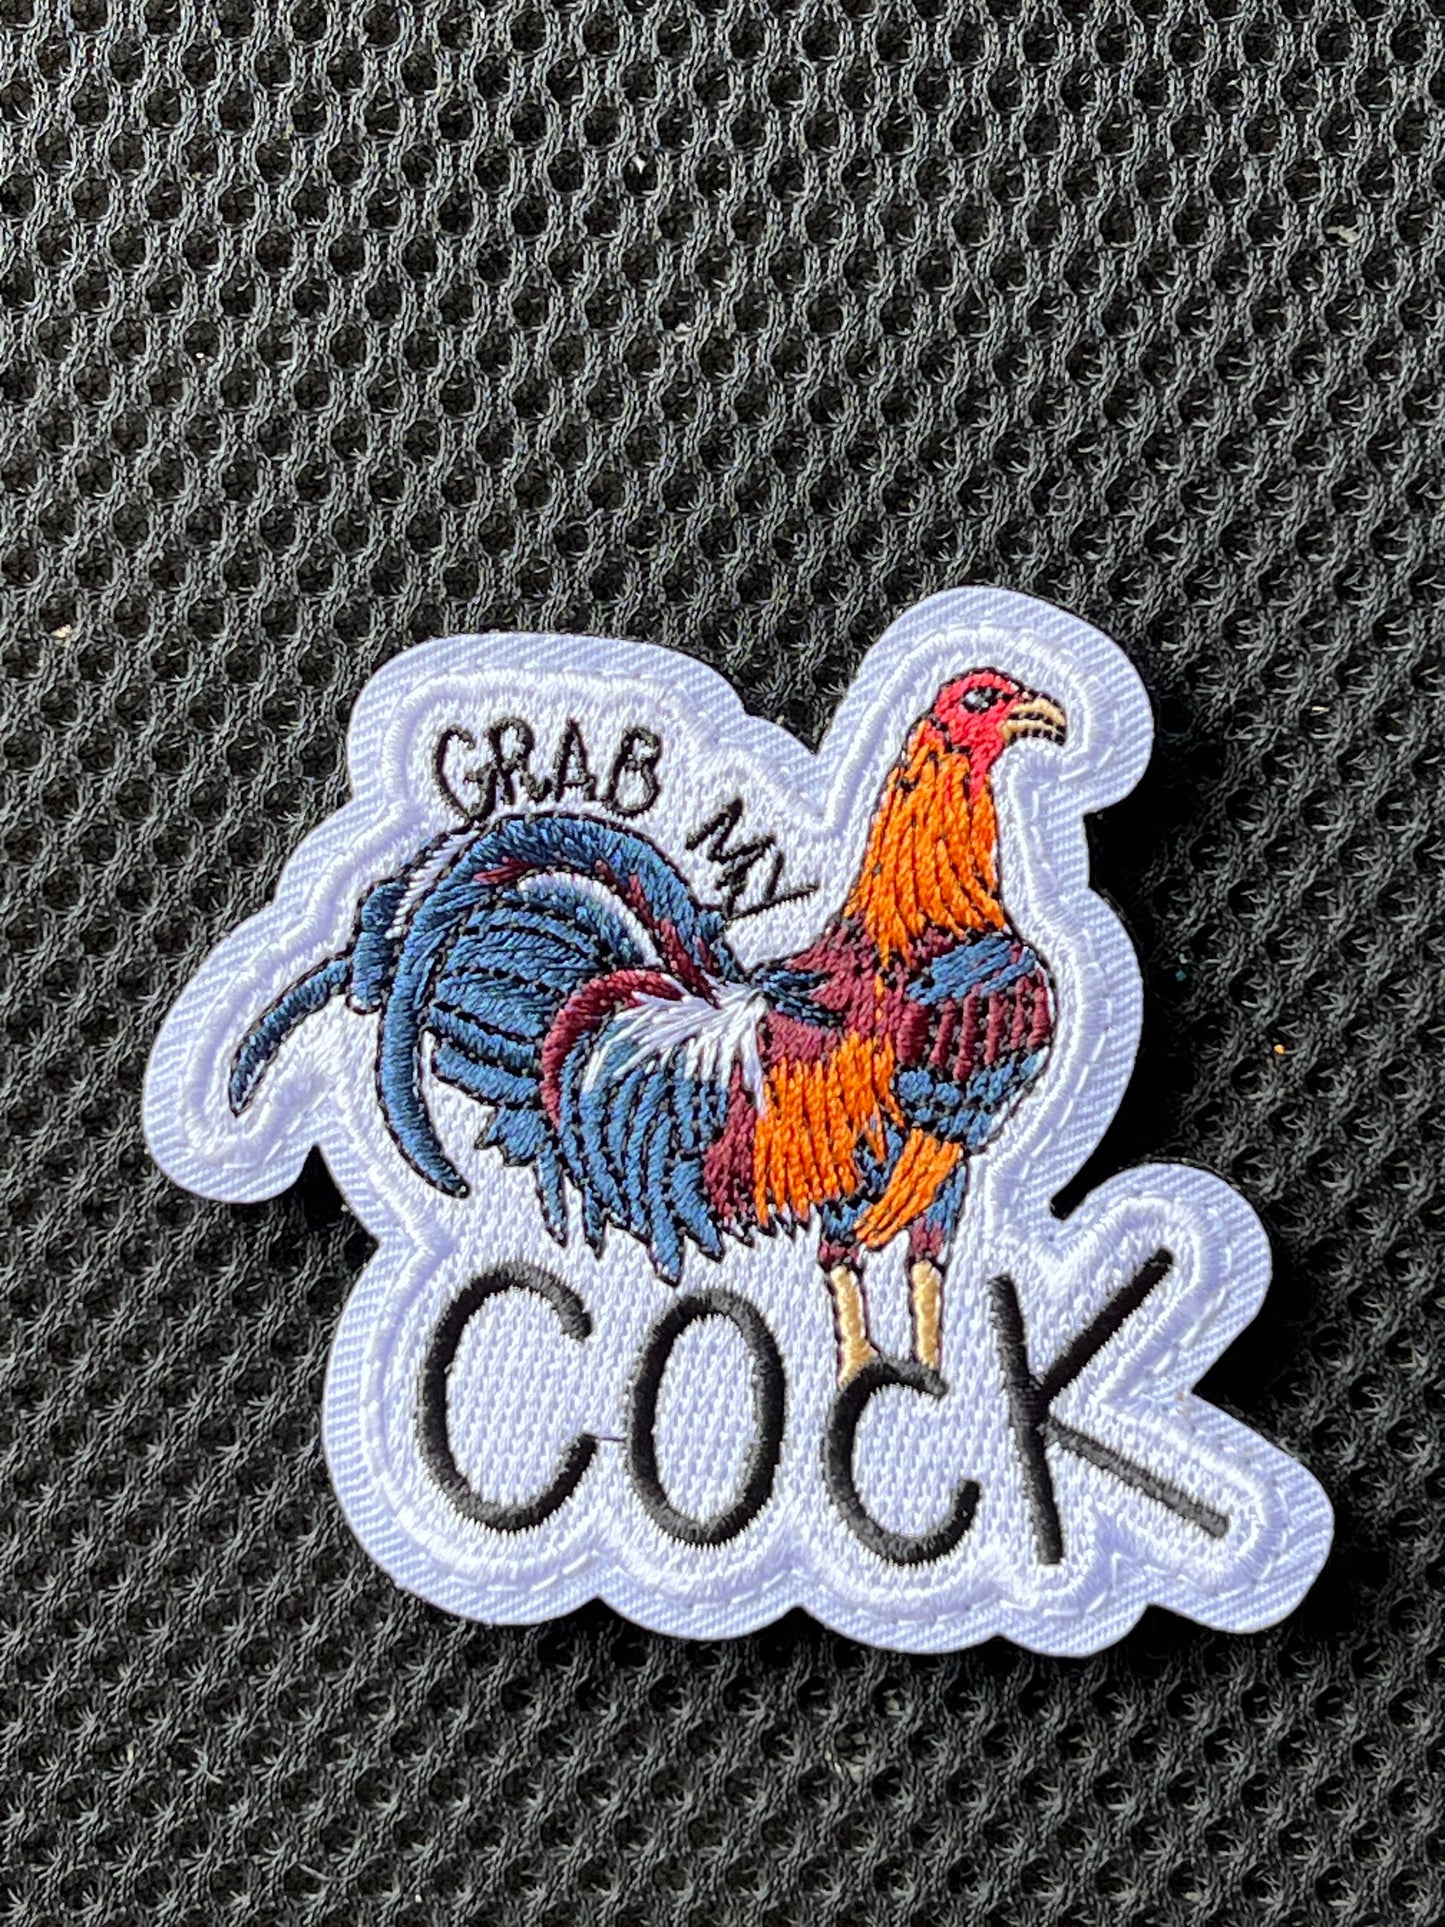 Grab My Cock Patch